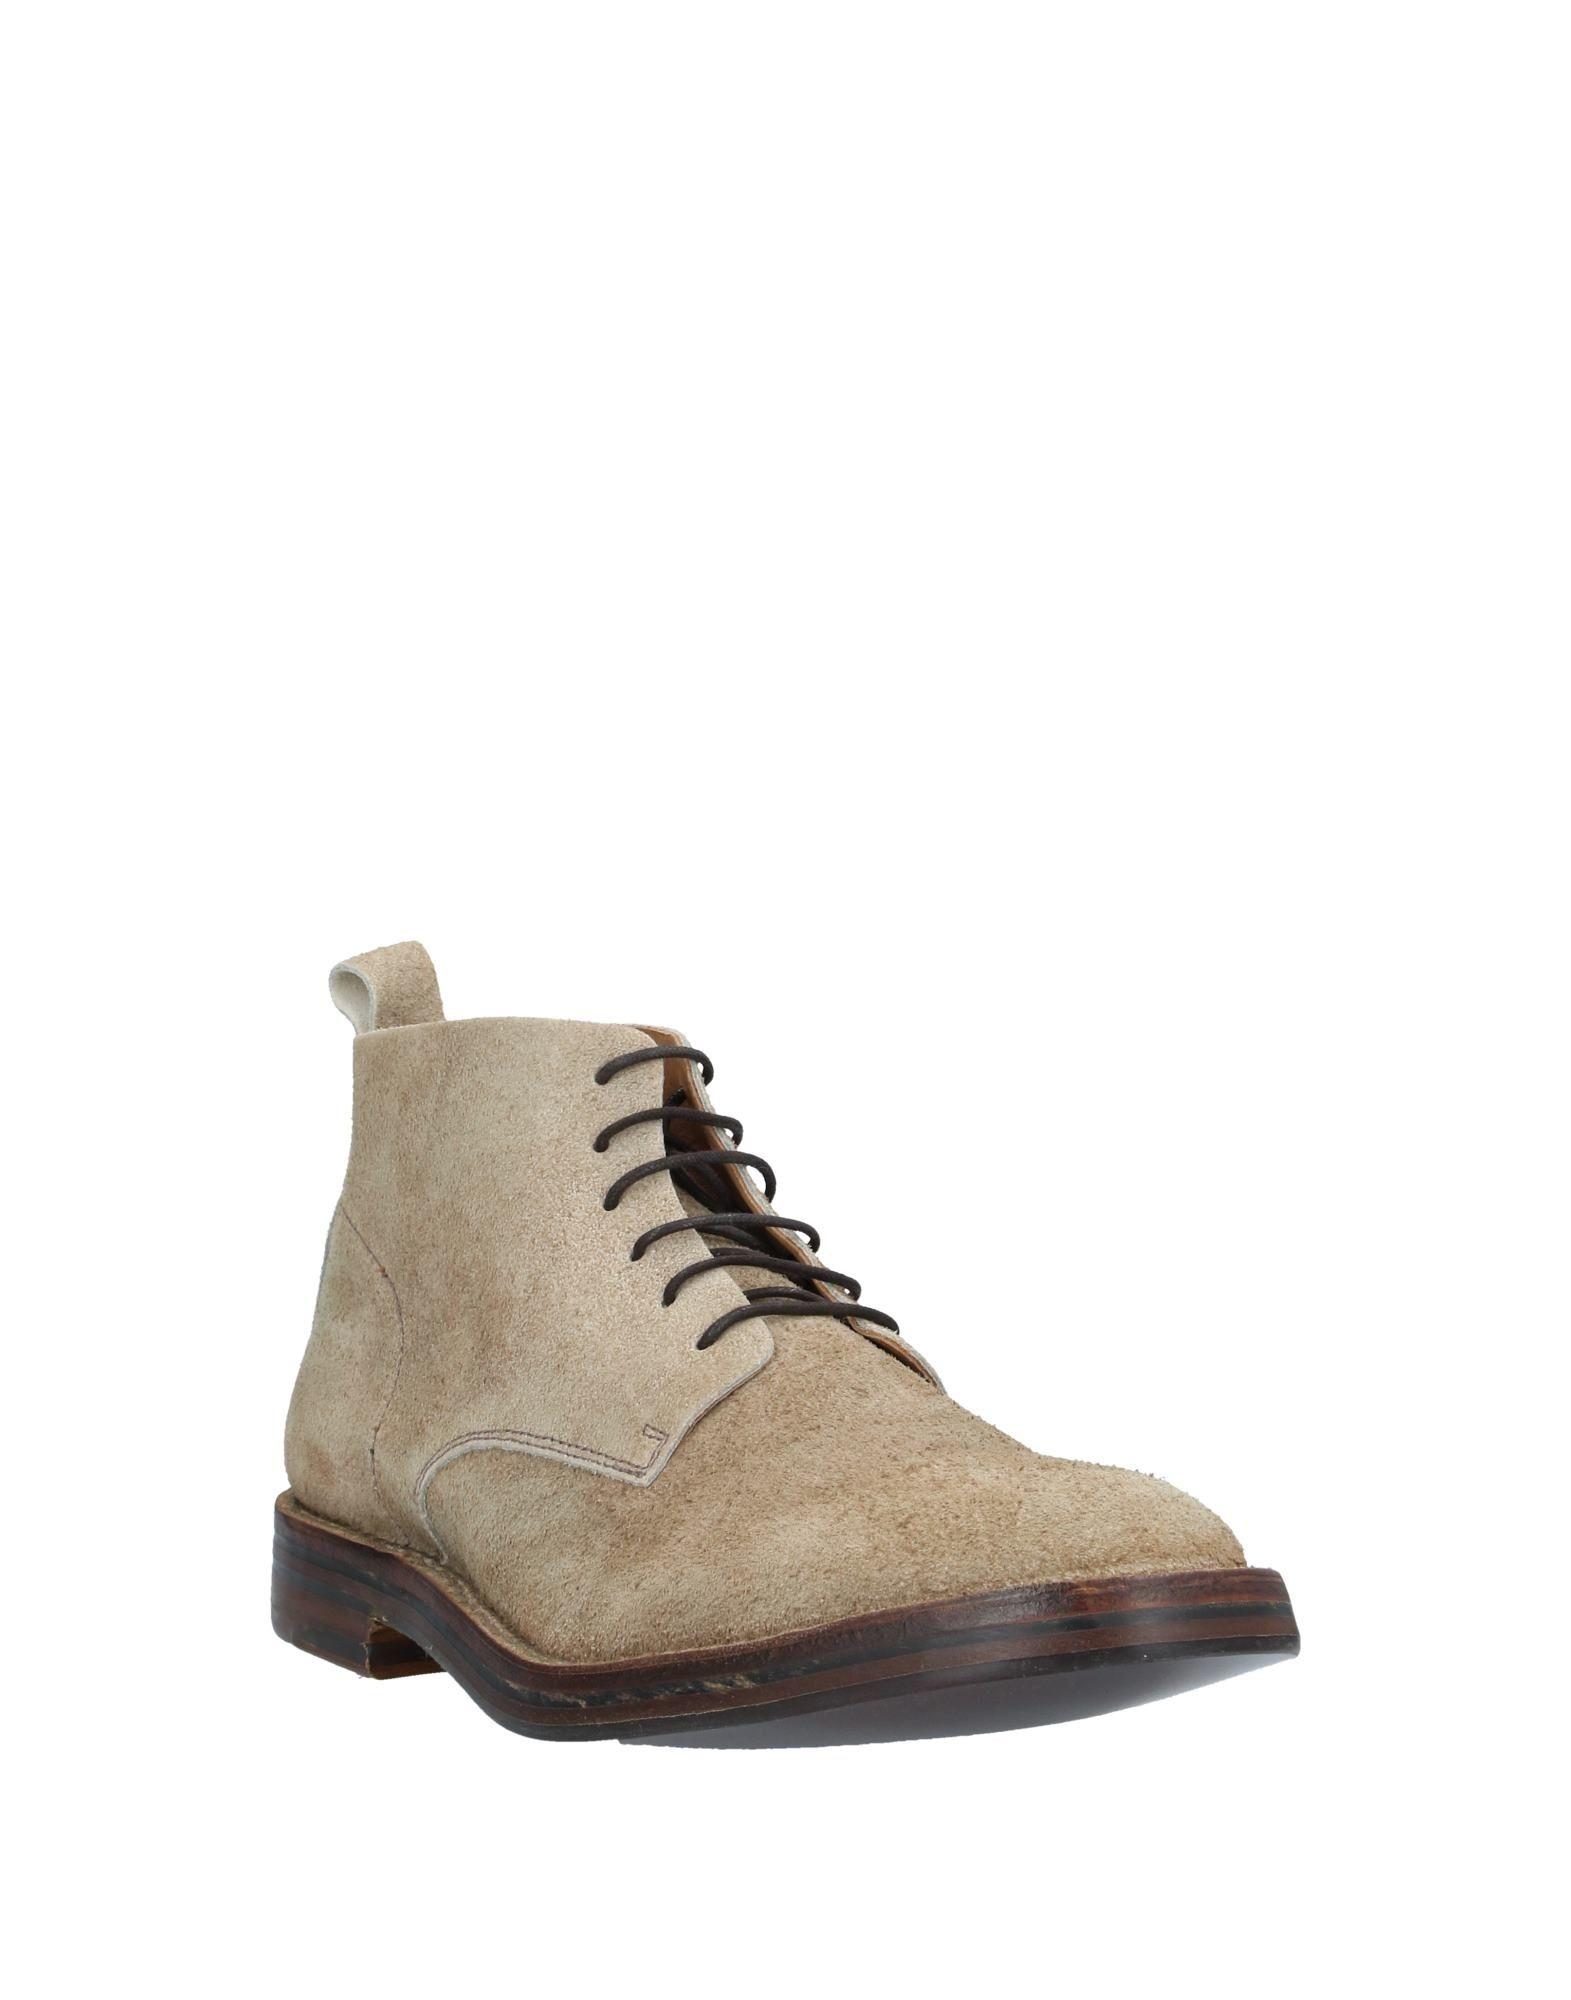 Buttero Suede Ankle Boots in Beige (Natural) for Men - Lyst